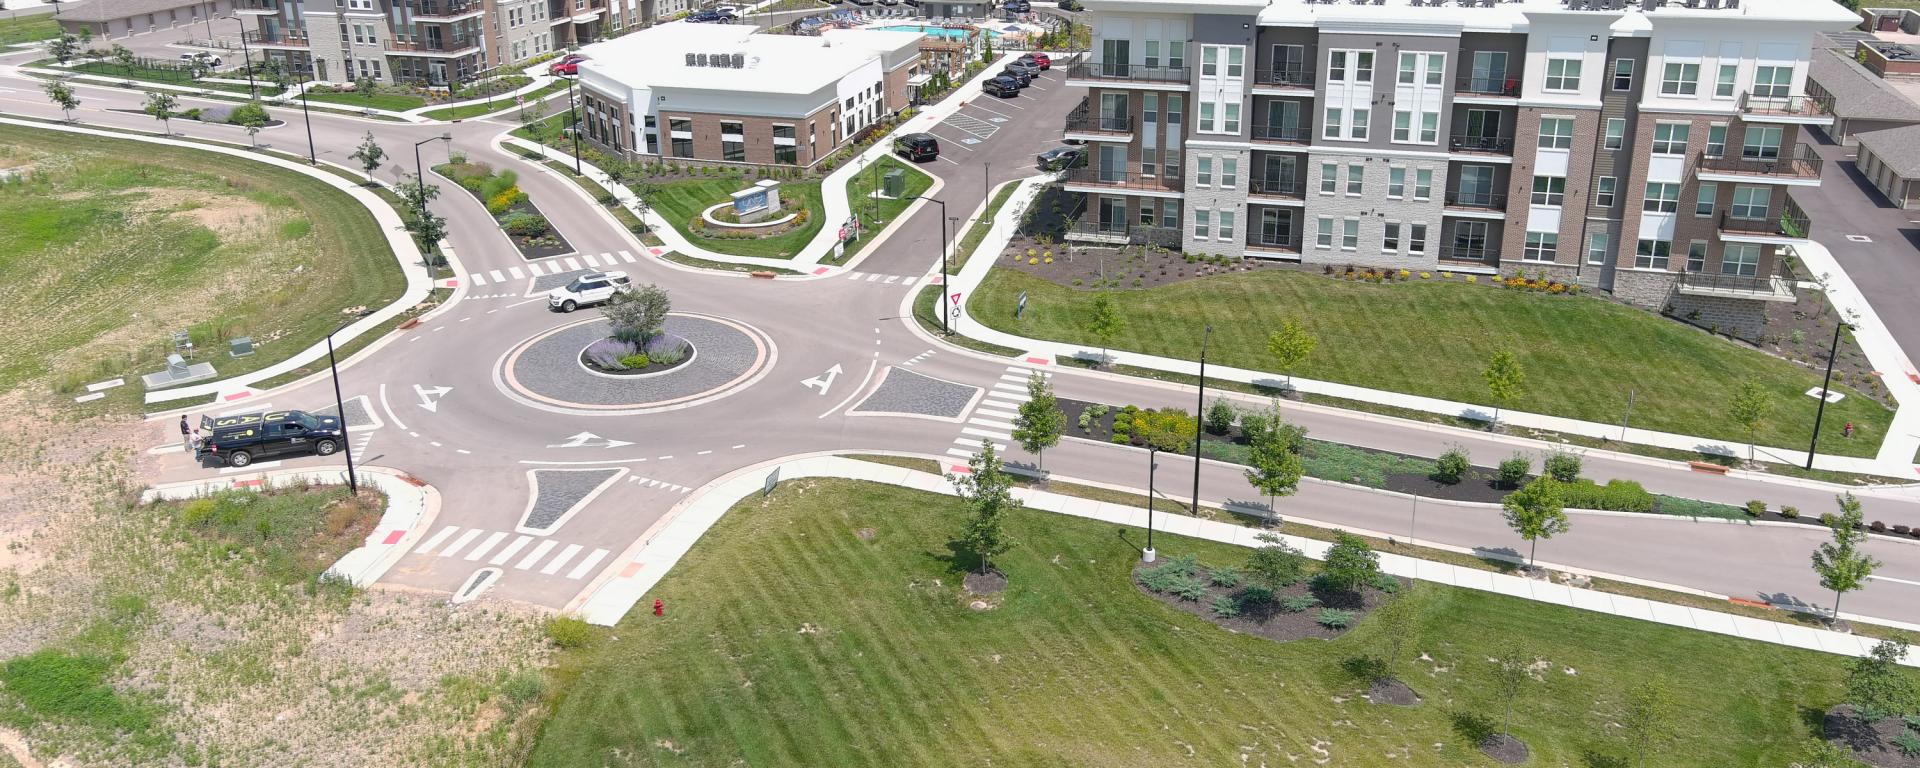 aerial photo of roundabout